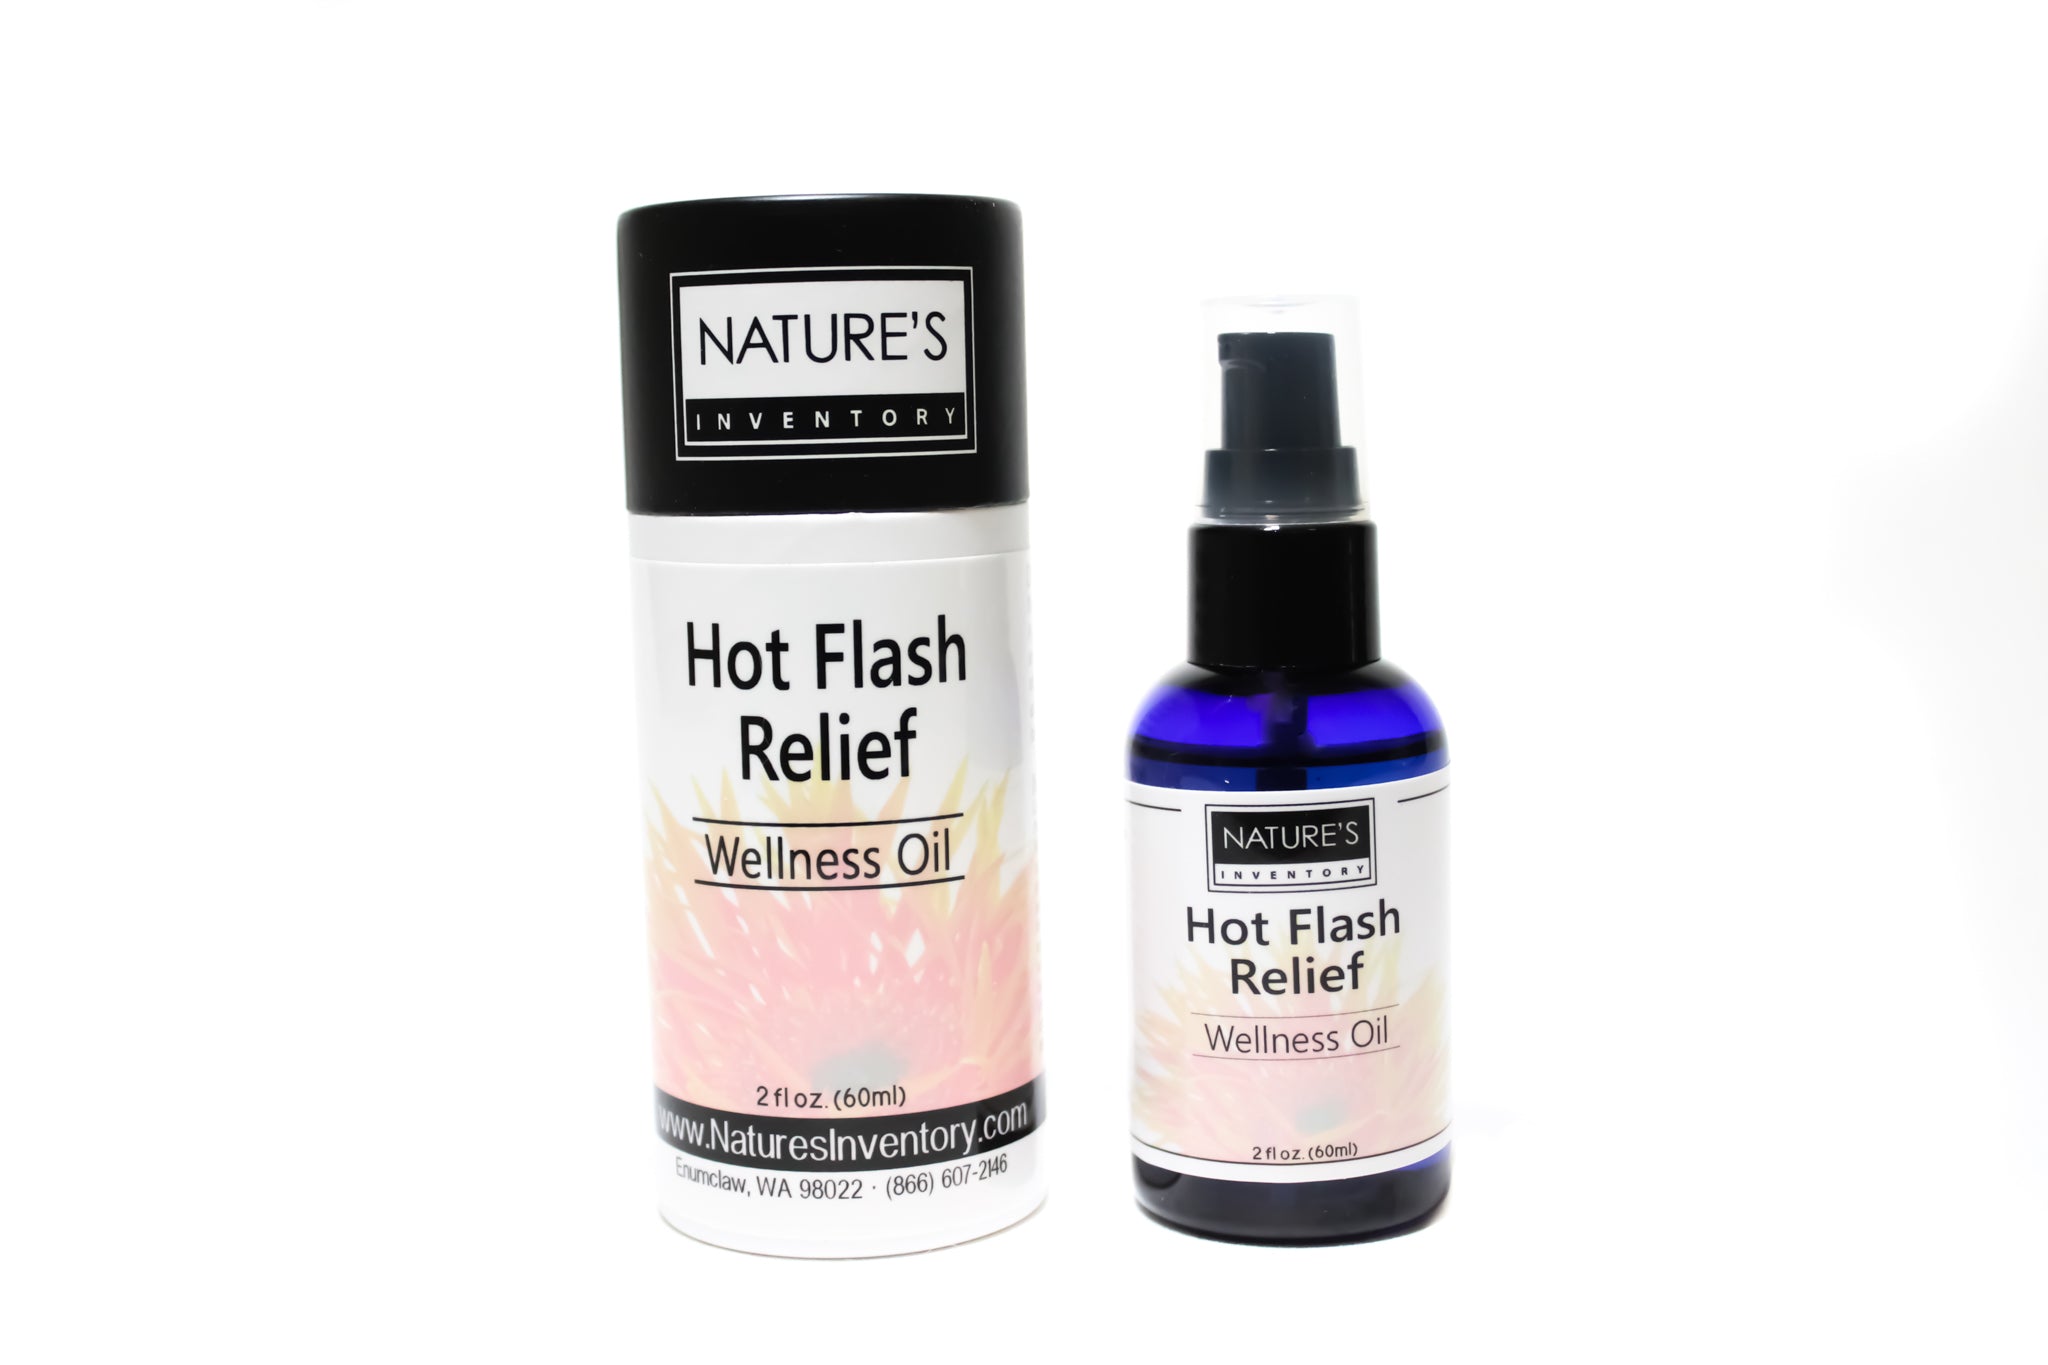 Hot Flash Wellness Oil – Nature's Inventory